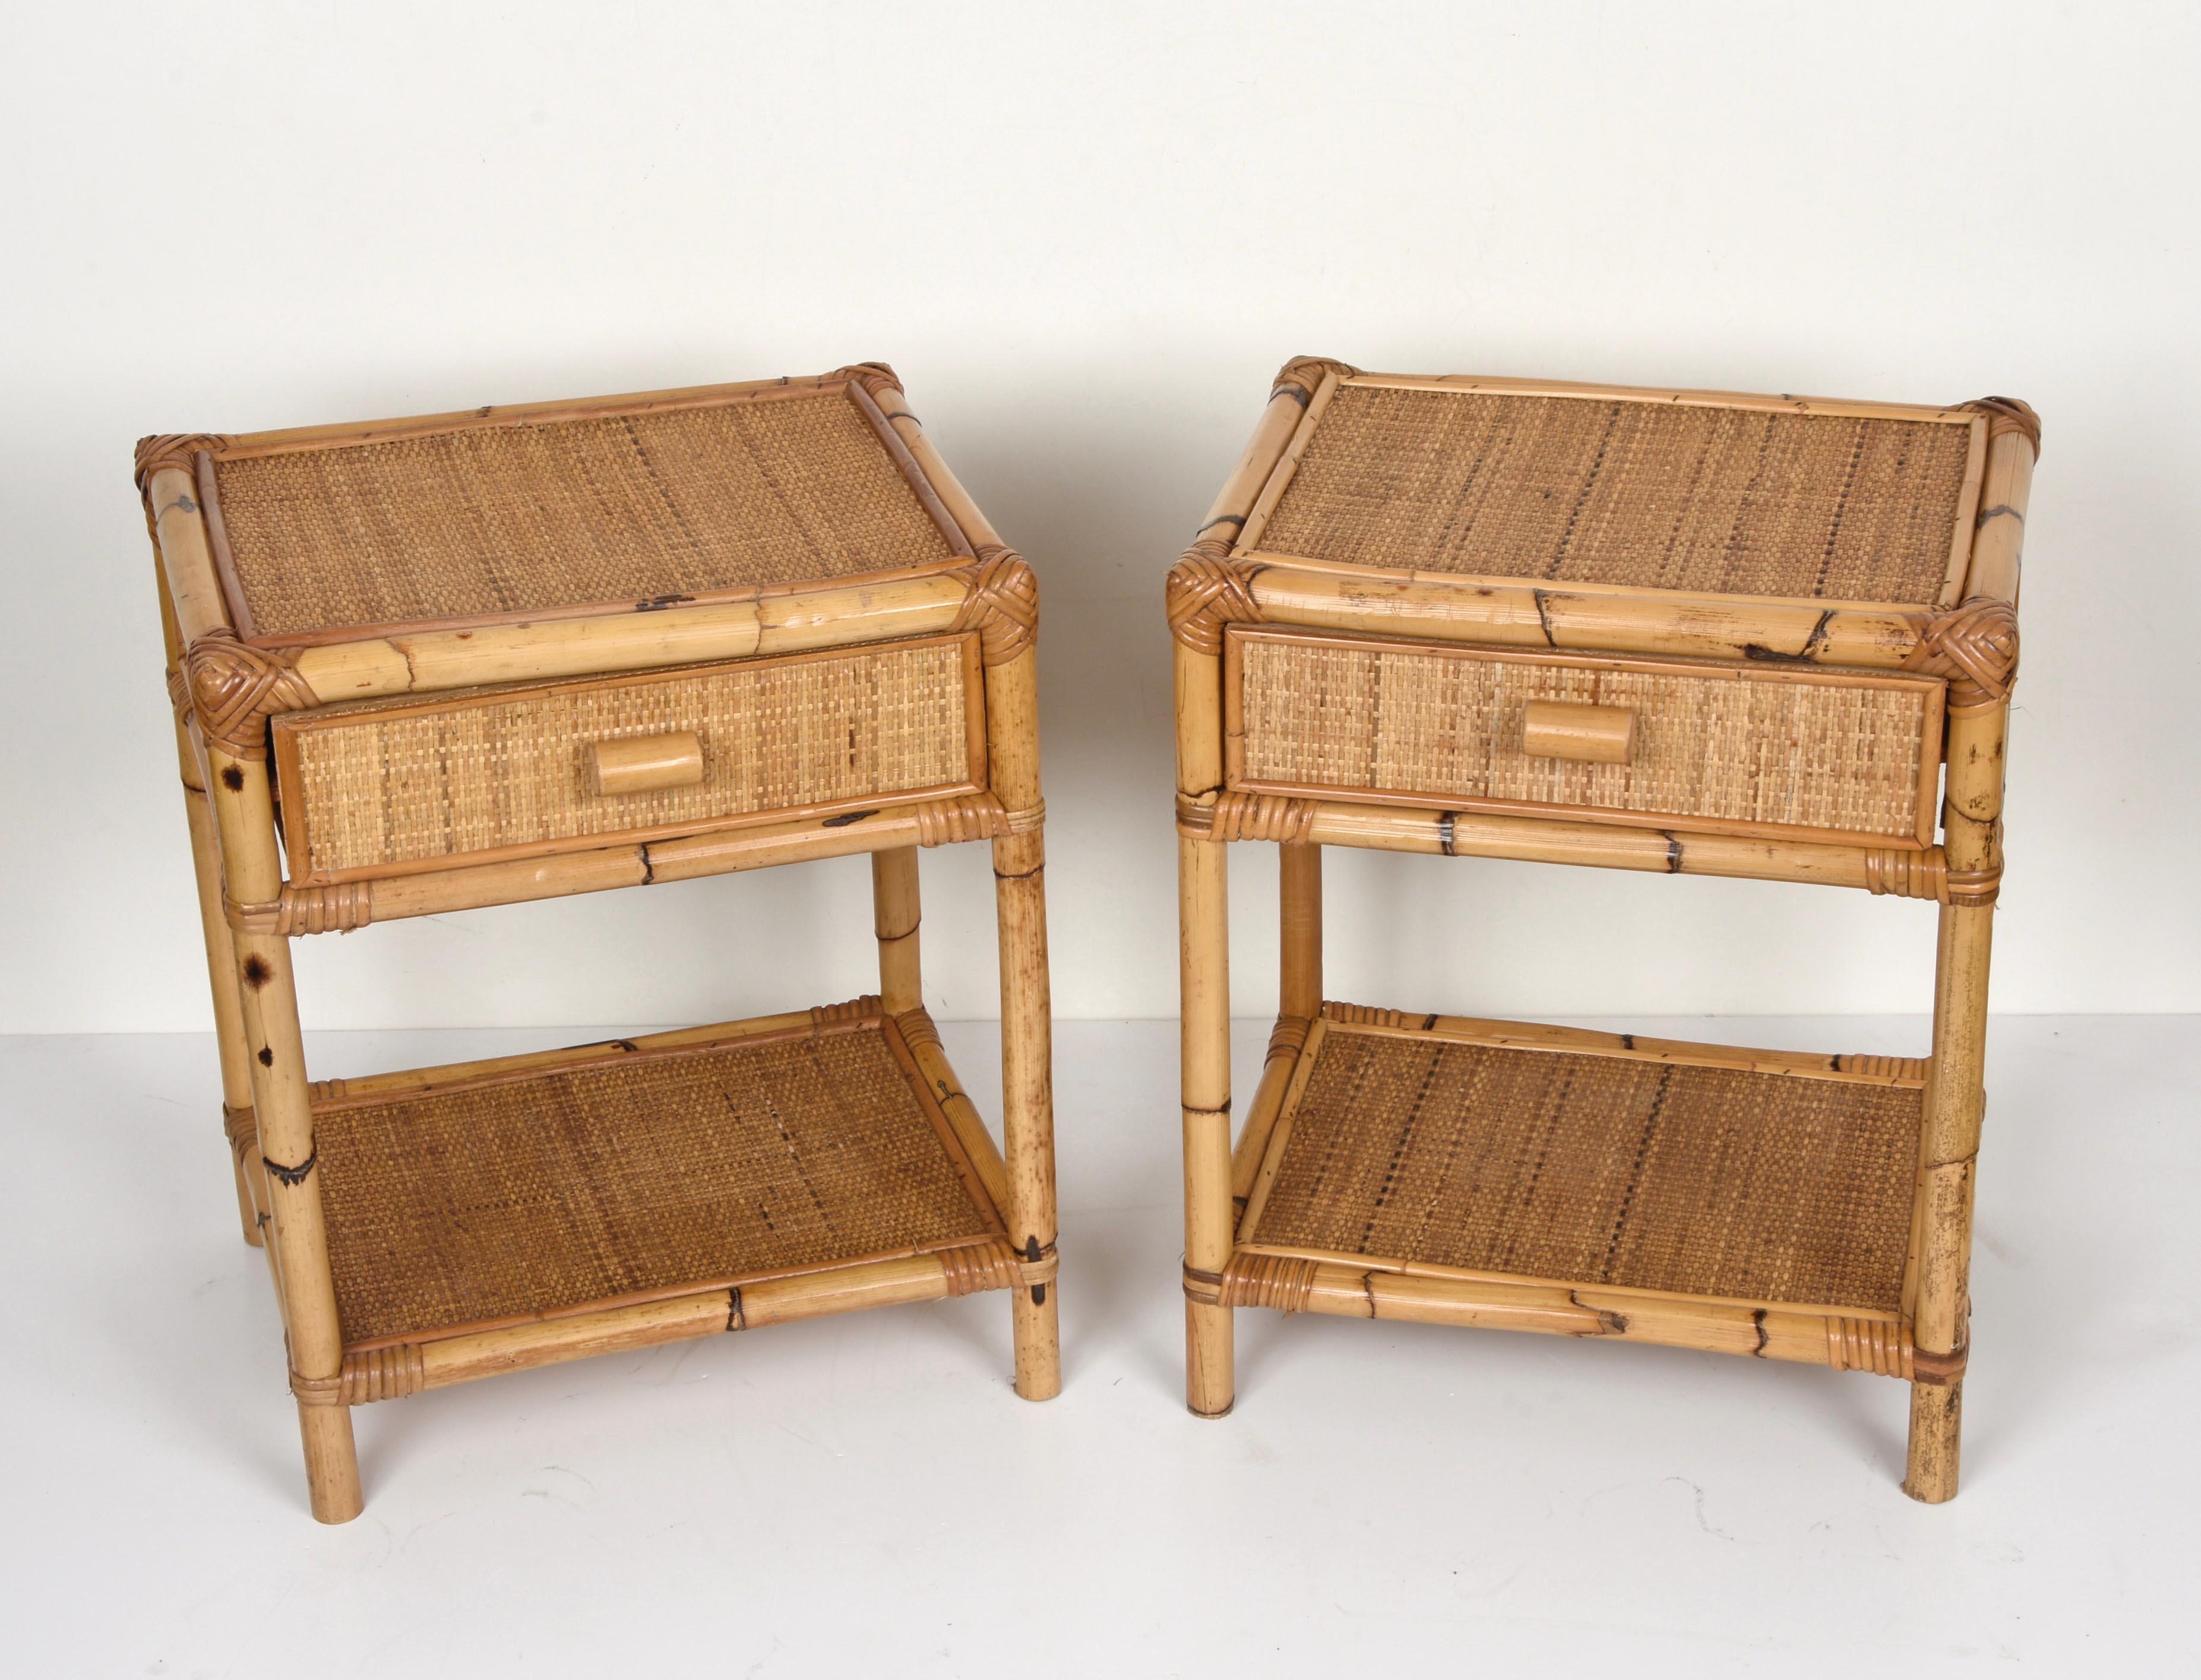 Amazing pair of Mid-Century Modern bamboo and rattan sideboards. This amazing set was designed in Italy during the 1960s.

The key elements of this wonderful set are its beautiful rationalist lines, elevated by the use of materials, bamboo for the